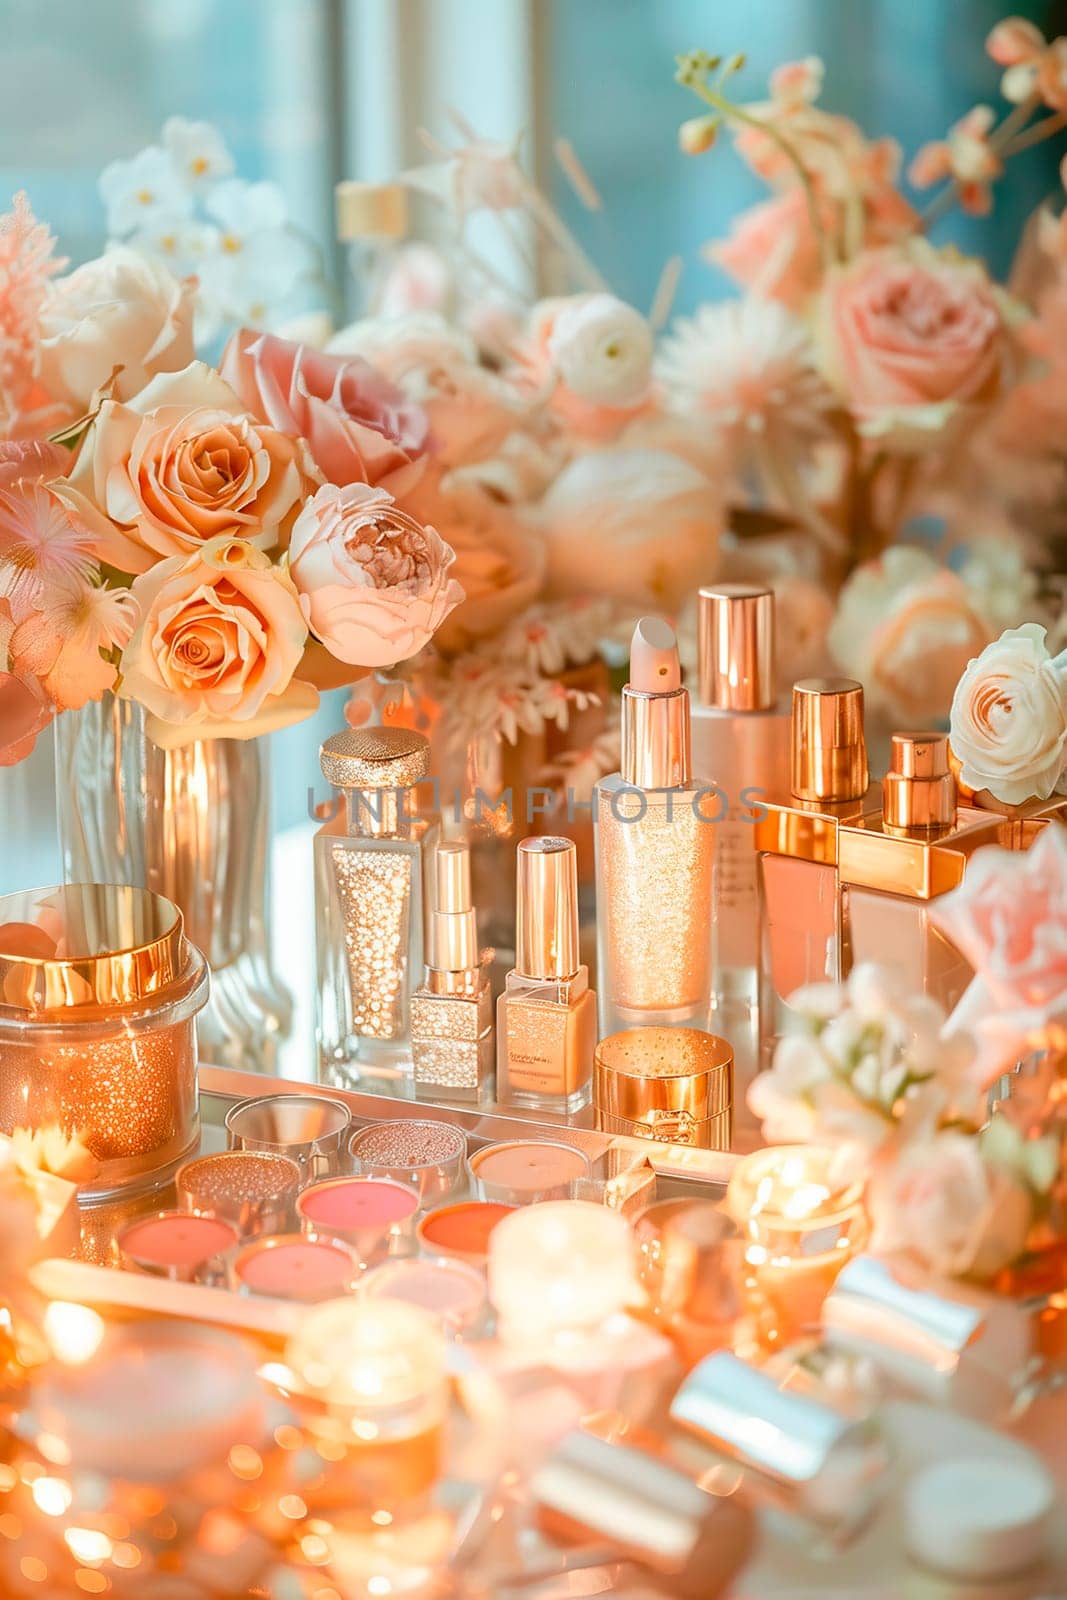 various cosmetics and flowers on the table. selective focus. by yanadjana